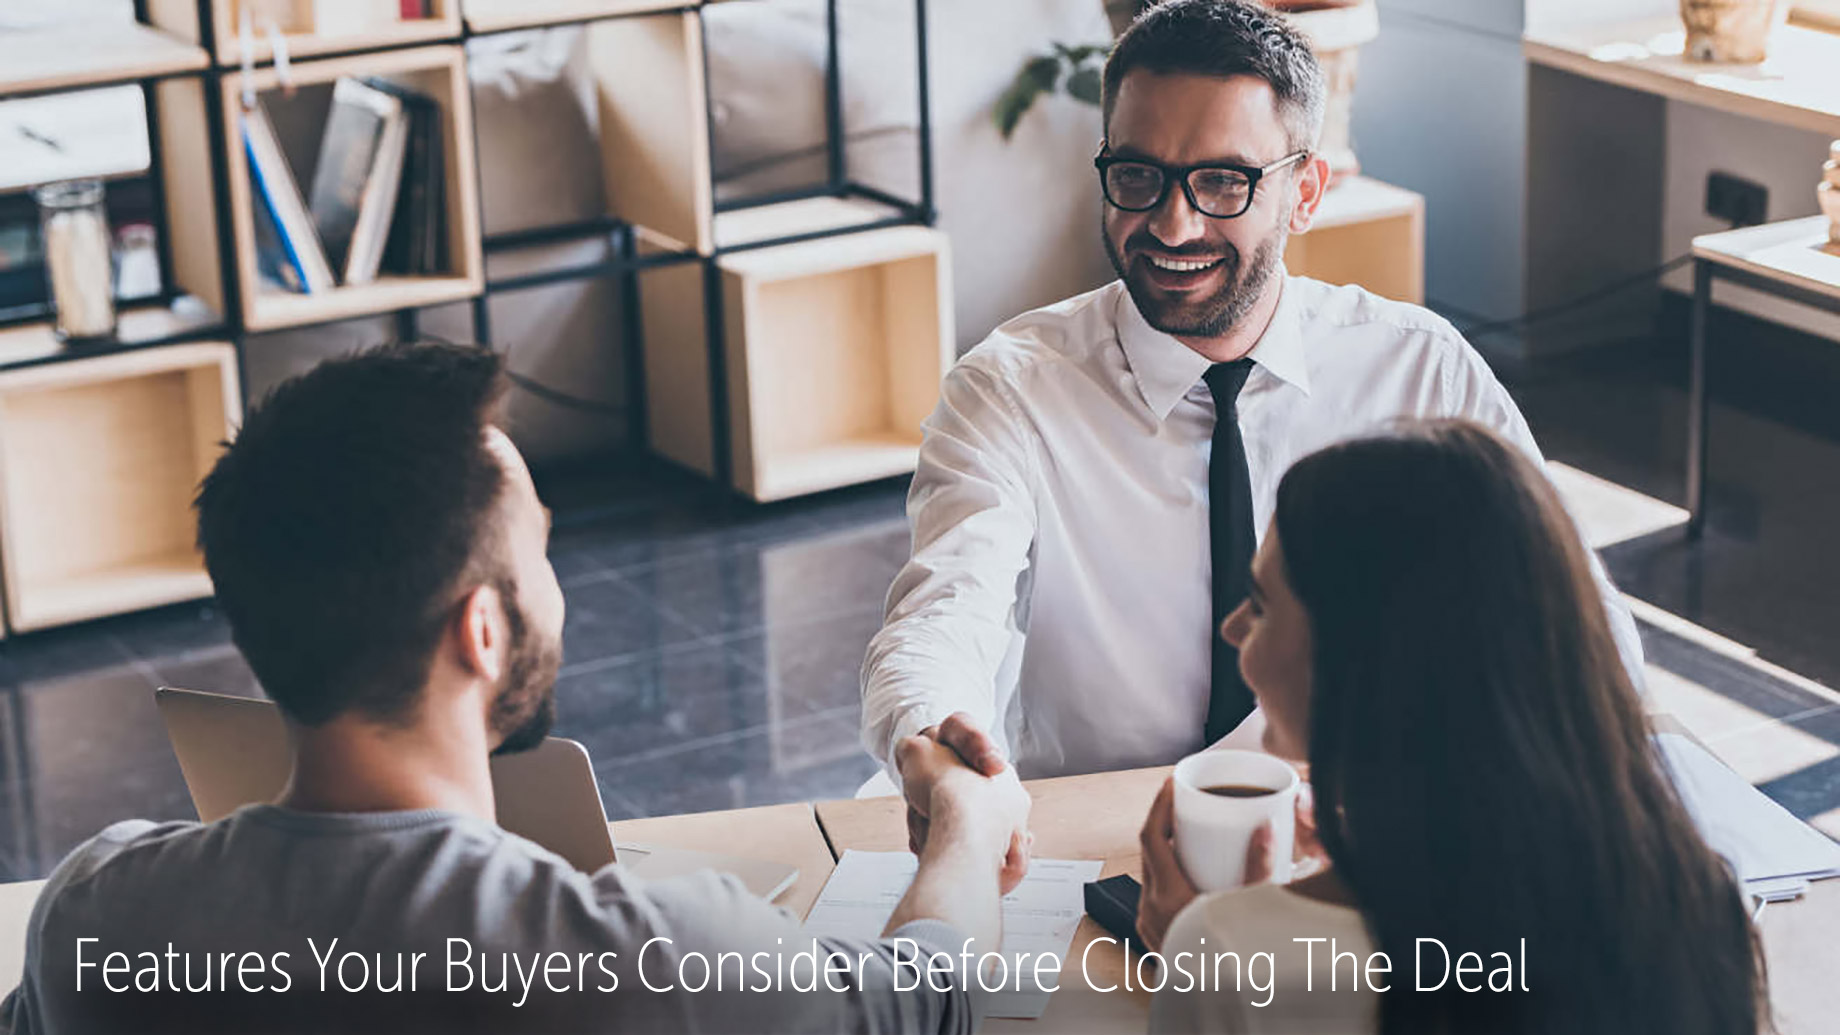 Real Estate Tips - Features Your Buyers Consider Before Closing The Deal